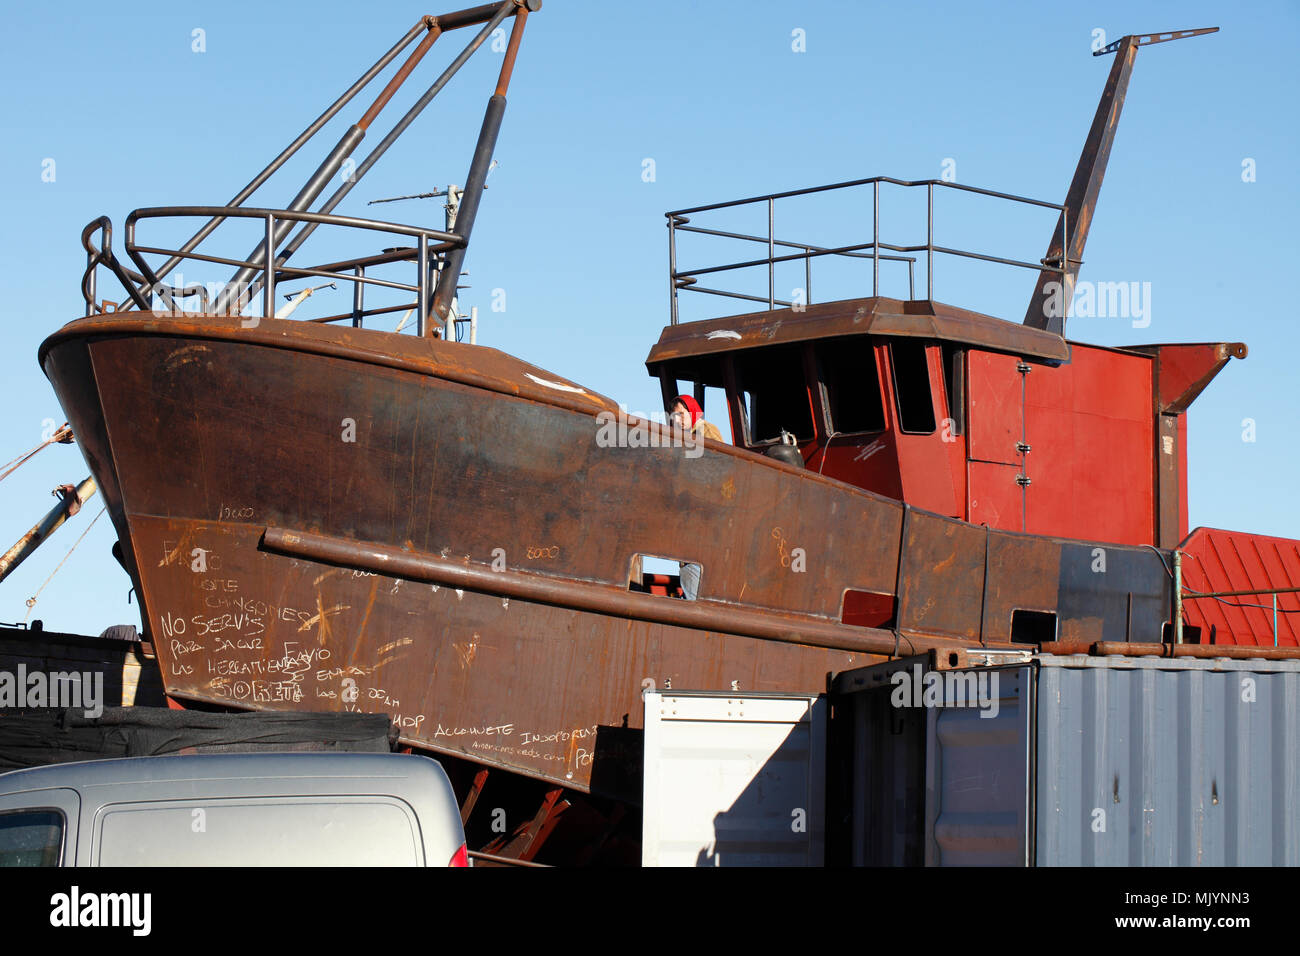 Boatyard. Construction of a new boat for the Yellow fleet at Puerto Rawson on the Chubut River. Argentina, Patagonia. Stock Photo